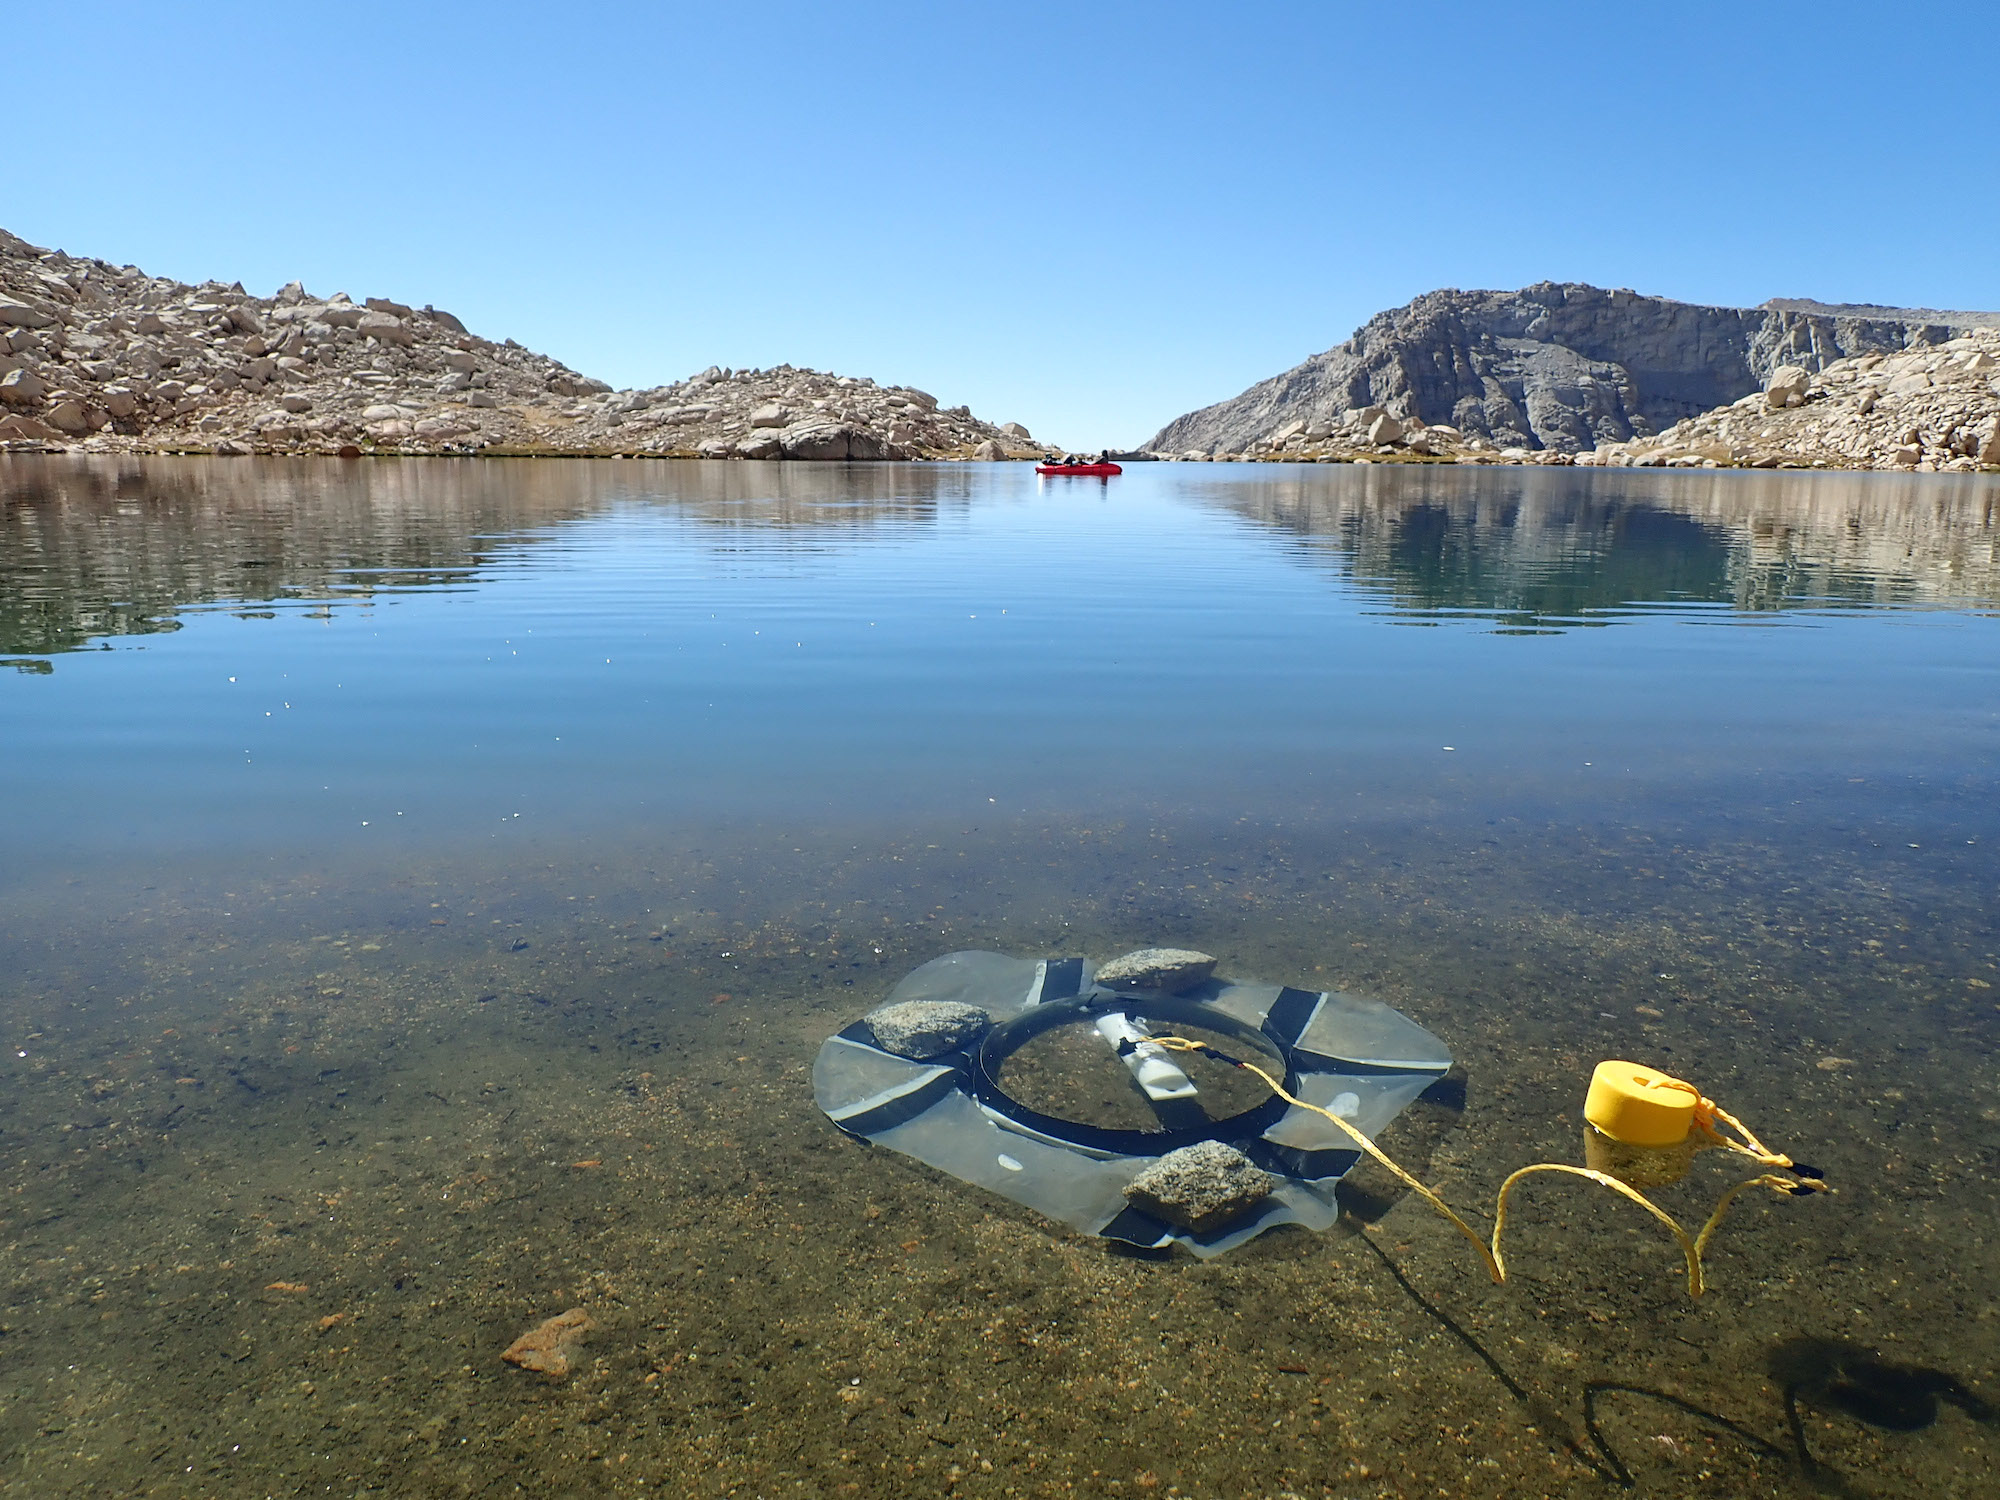 Benthic chambers measure sediment metabolism at a small Sierra Nevada lake in August 2018. (E. Suenaga)